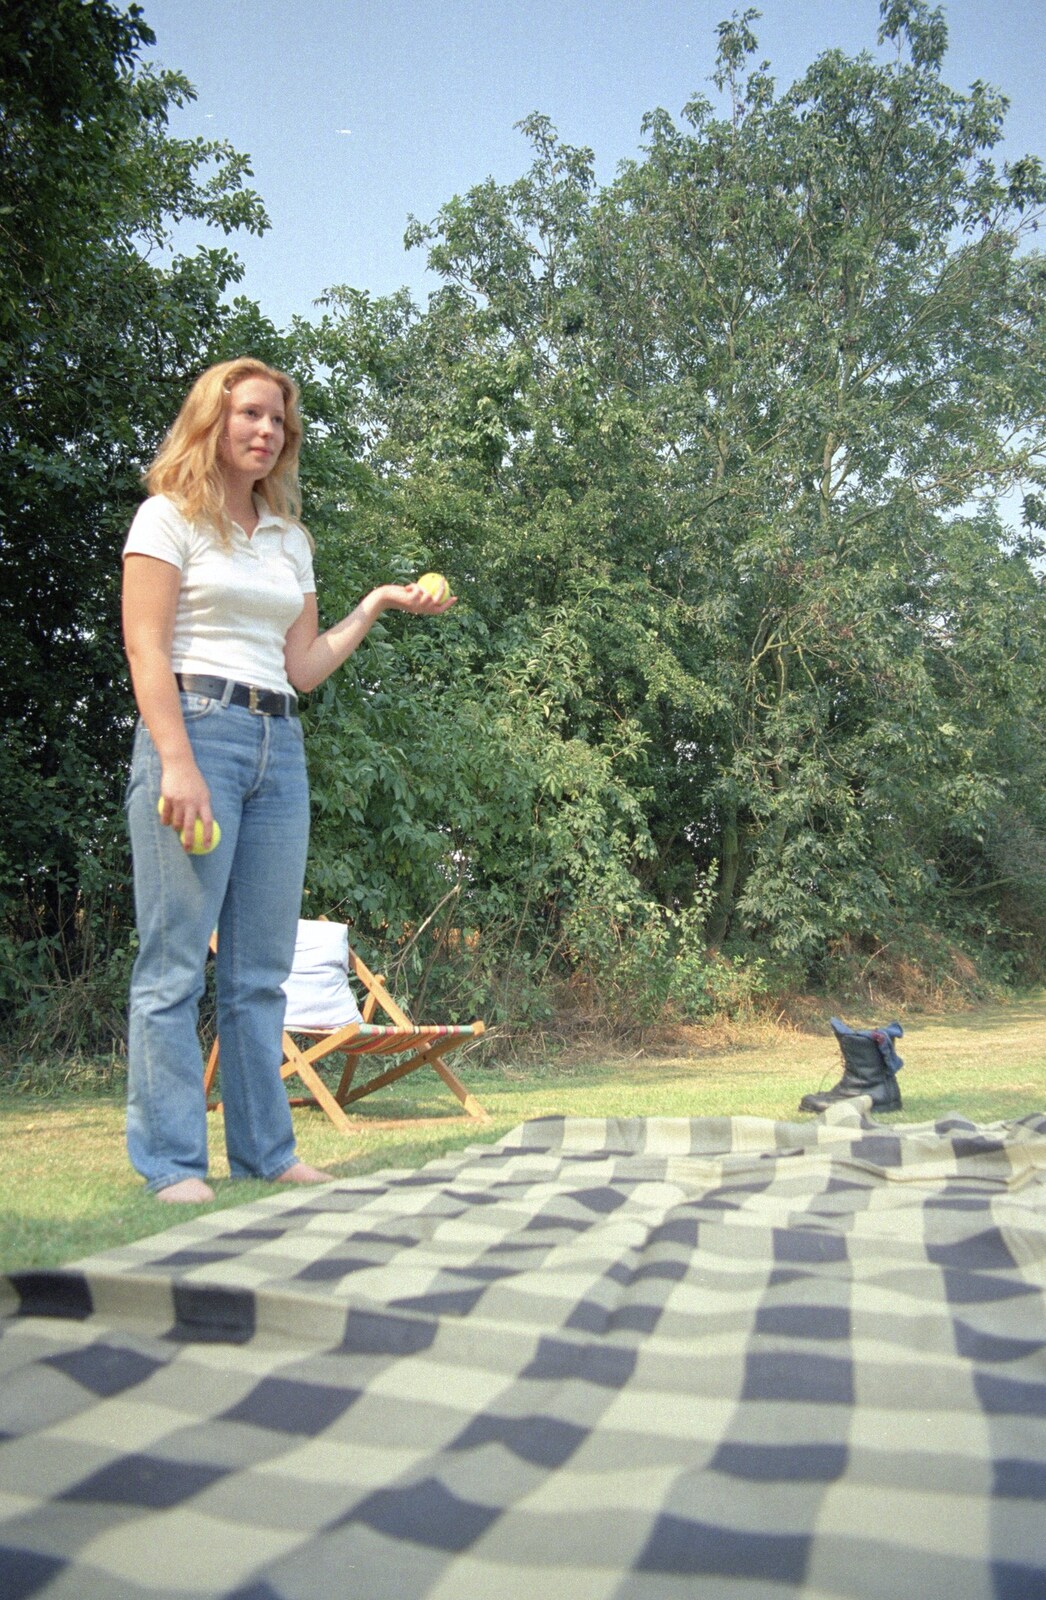 'Dave' does some juggling from Bromestock 1 and a Mortlock Barbeque, Brome and Thrandeston, Suffolk - 24th June 1997